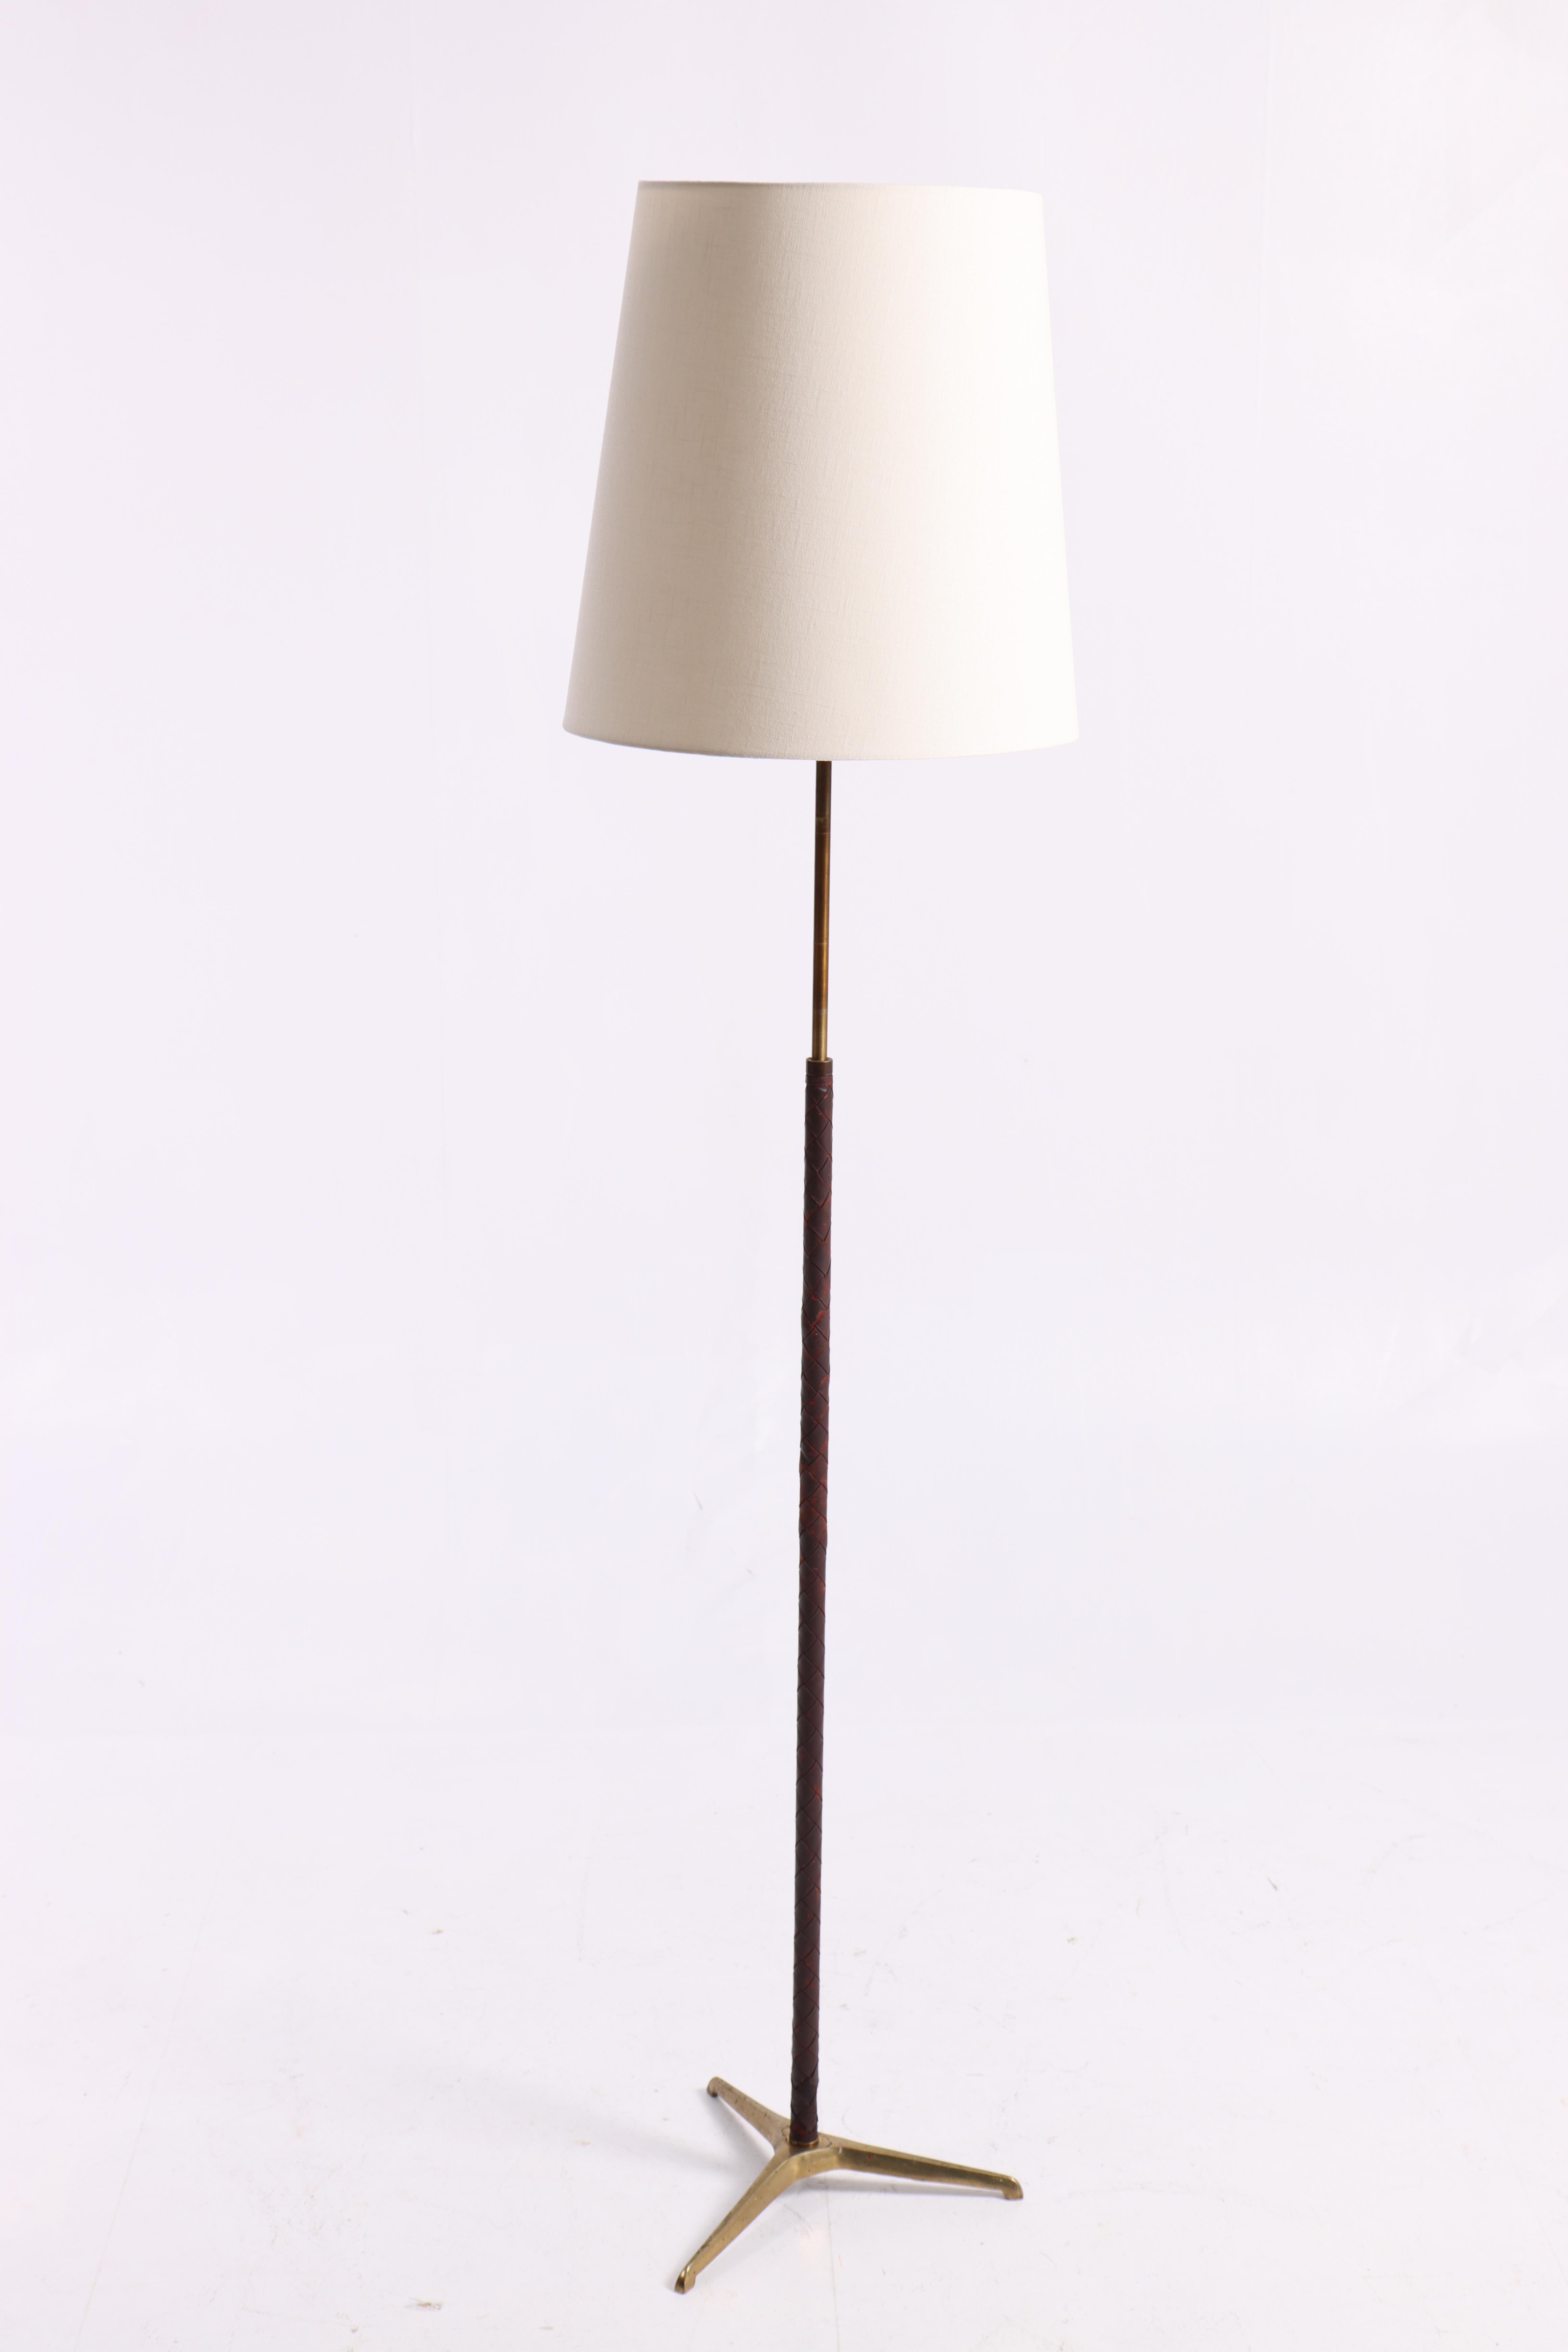 Scandinavian Modern Midcentury Floor Lamp in Brass and Braided Leather, Swedish Modern, 1950s For Sale